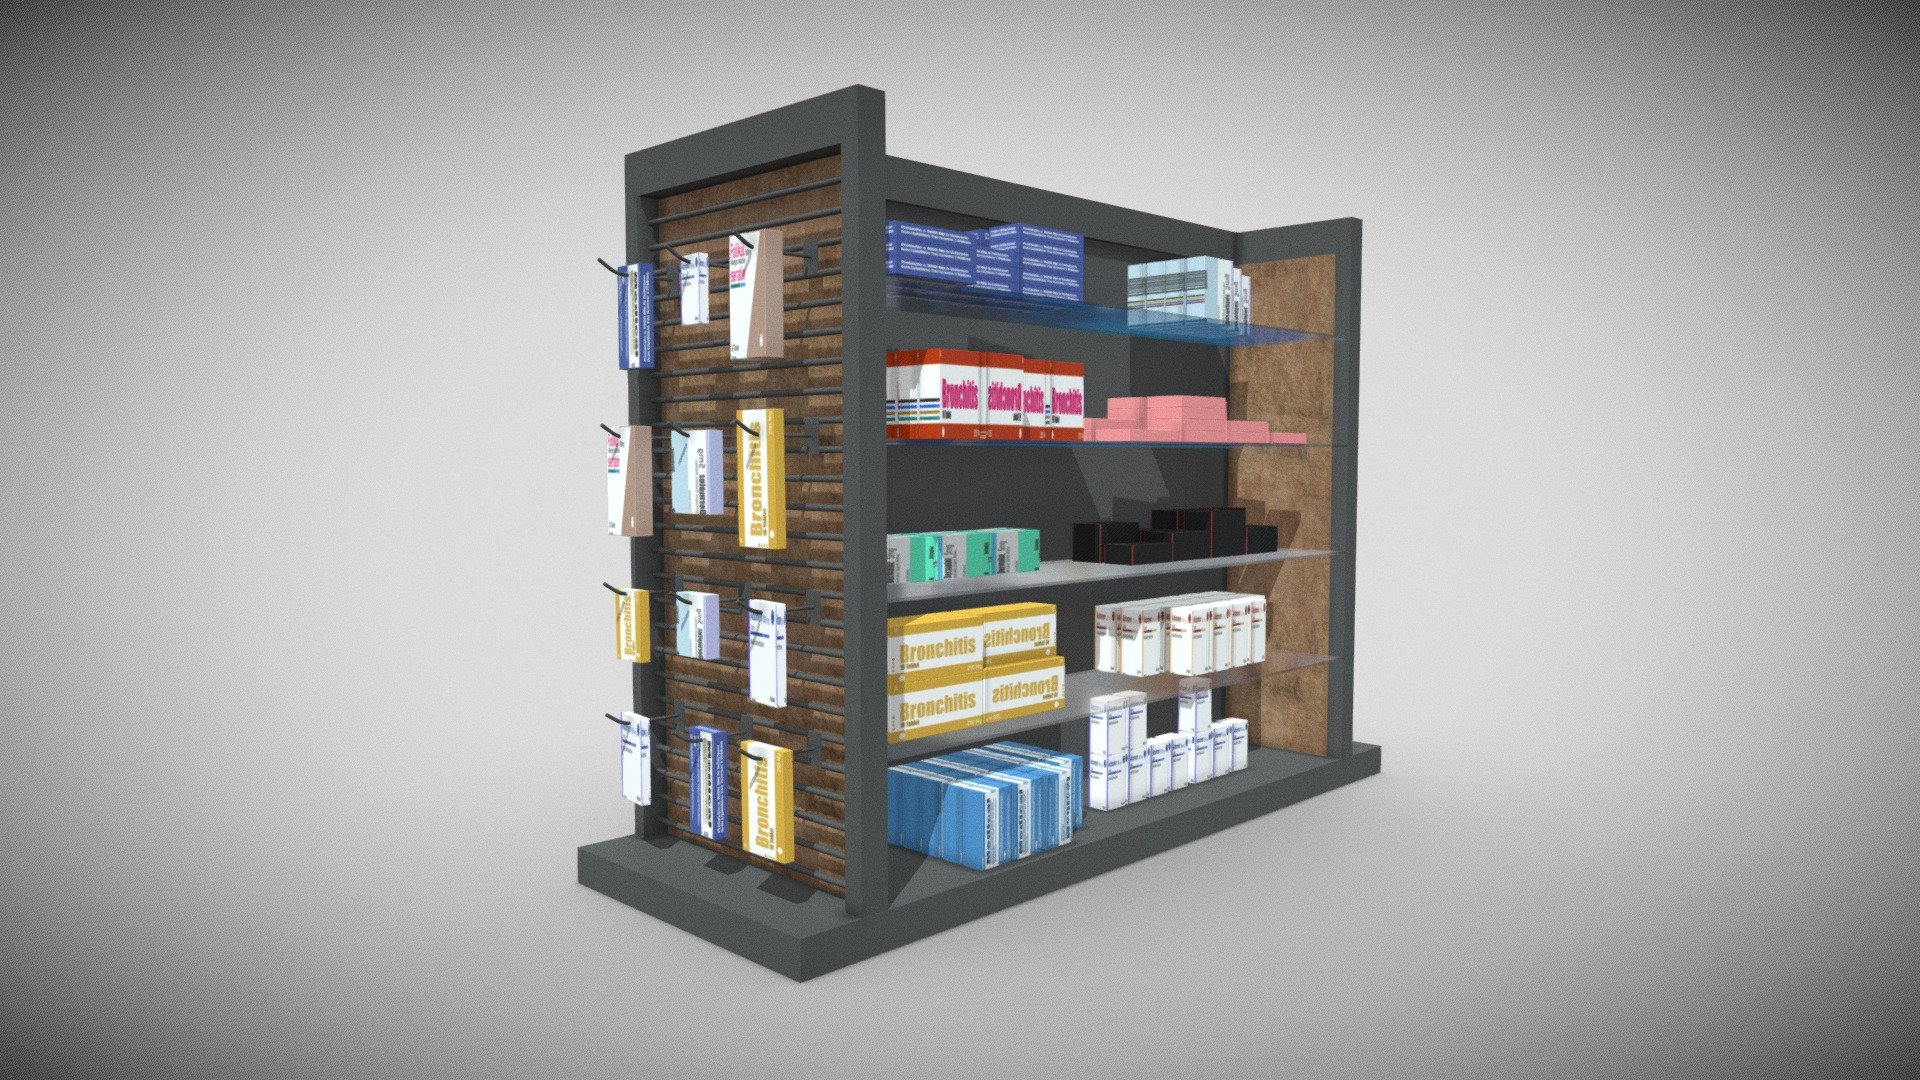 The medicine stand can be an impressive element for your projects. realistic appearance and material, easy handling, low polygon 3d model